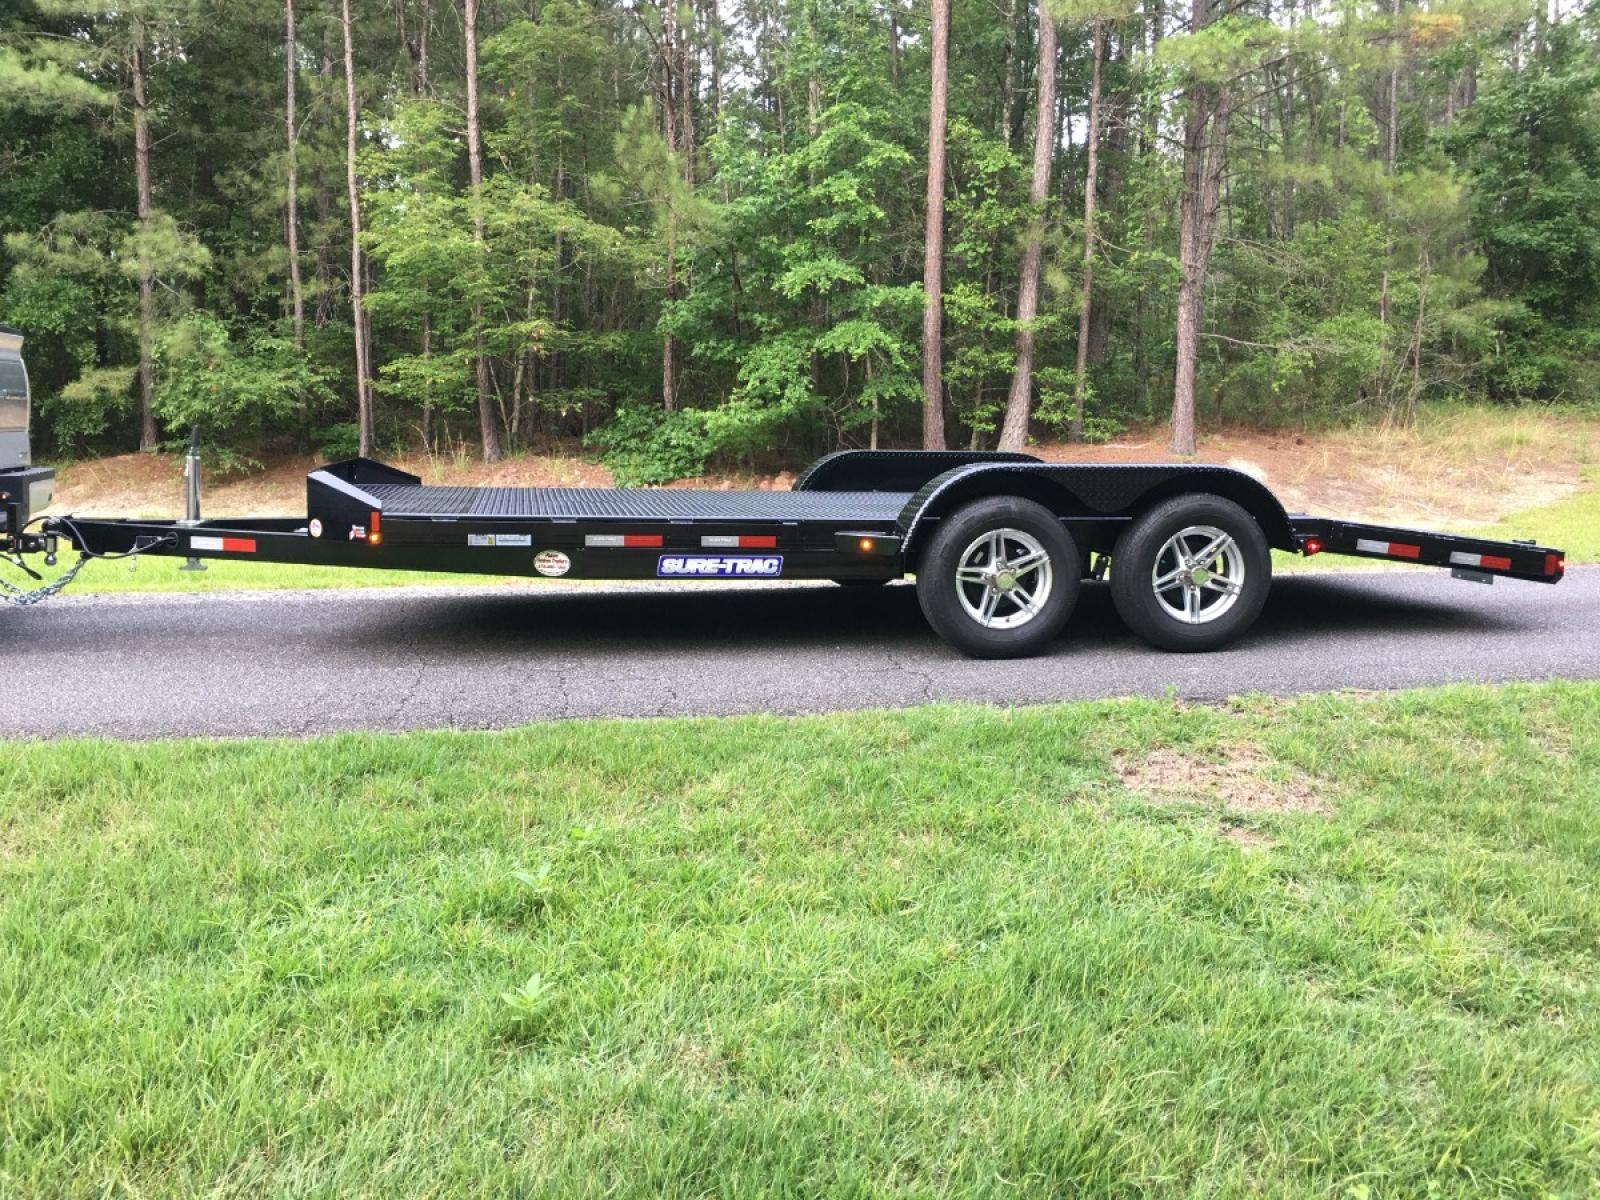 2022 Black Sure-Trac 7ft X 18ft Tandem , located at 1330 Rainey Rd., Macon, 31220, (478) 960-1044, 32.845638, -83.778687 - Please Hurry! Clearance Priced to Sell! New Deluxe Sure Trac Brand 7ft X 18ft All Steel Car Hauler Trailer. 7ft Wide and 18ft Long, Including the 48" Long Beaver Tail Low Profile Design for Easy Loading that Porsche or BMW Car! The Rear Slide Under Ramps are Both Lightweight and Heavy Duty! Rem - Photo #1